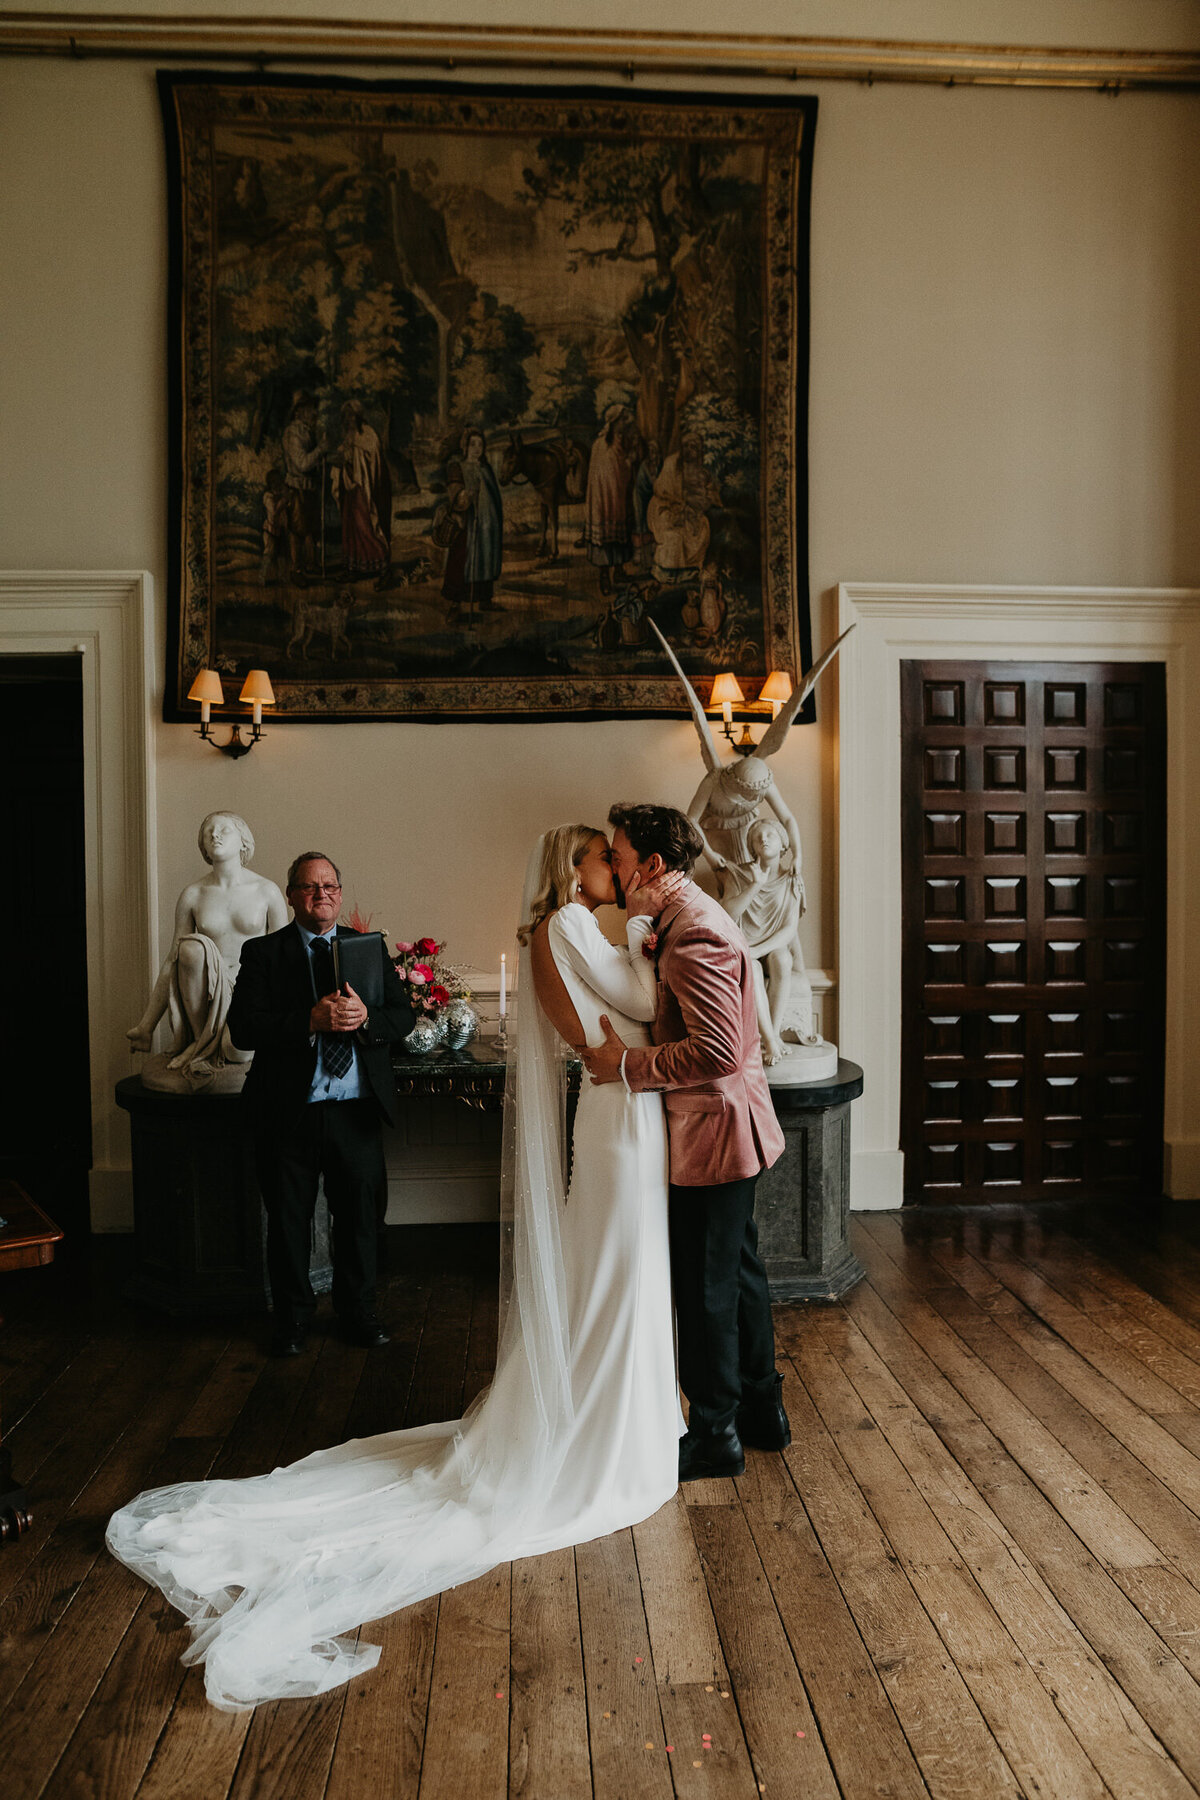 A couple kiss for the first time during their wedding ceremony at Elmore Court.